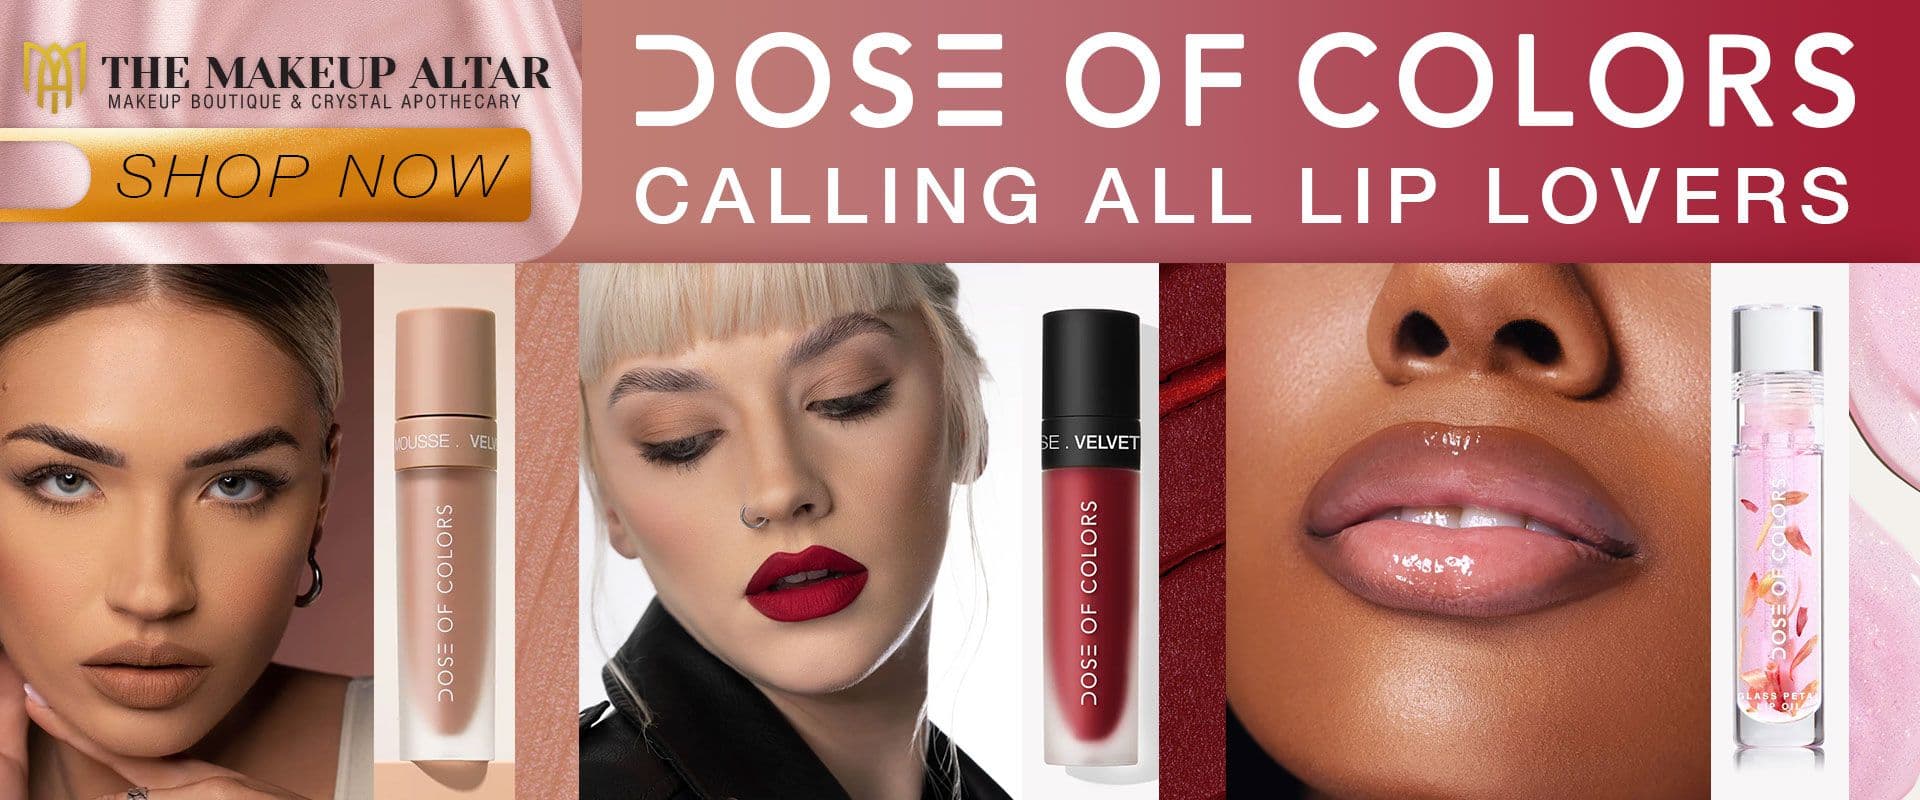 Dose of Colors Calling all lip lovers banner